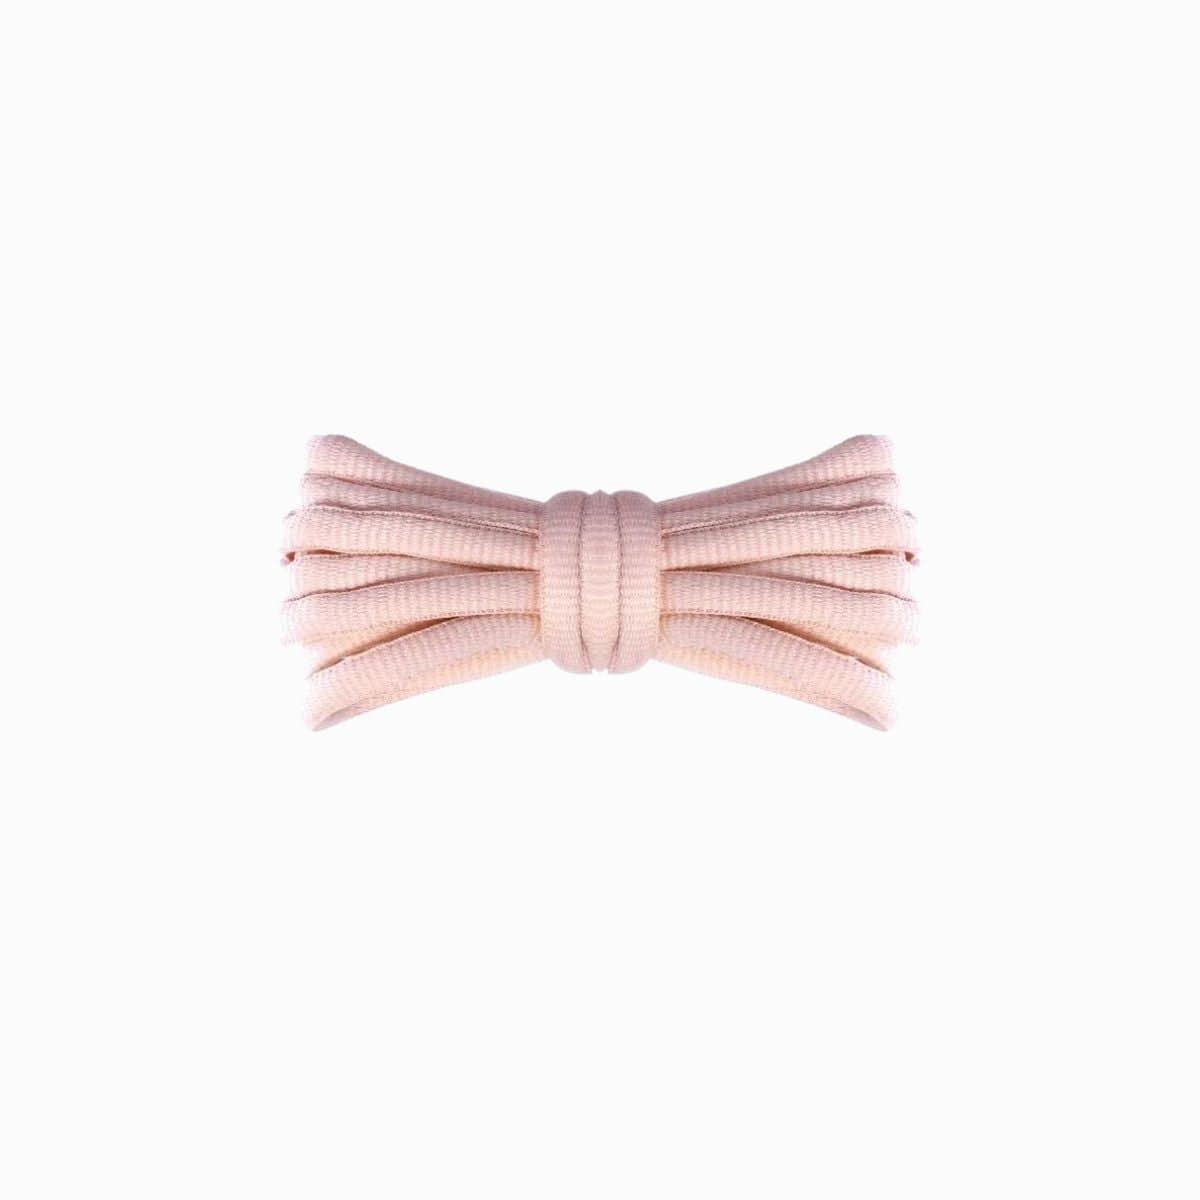 Nike_TN_Replacement_Shoelaces_Light_Pink